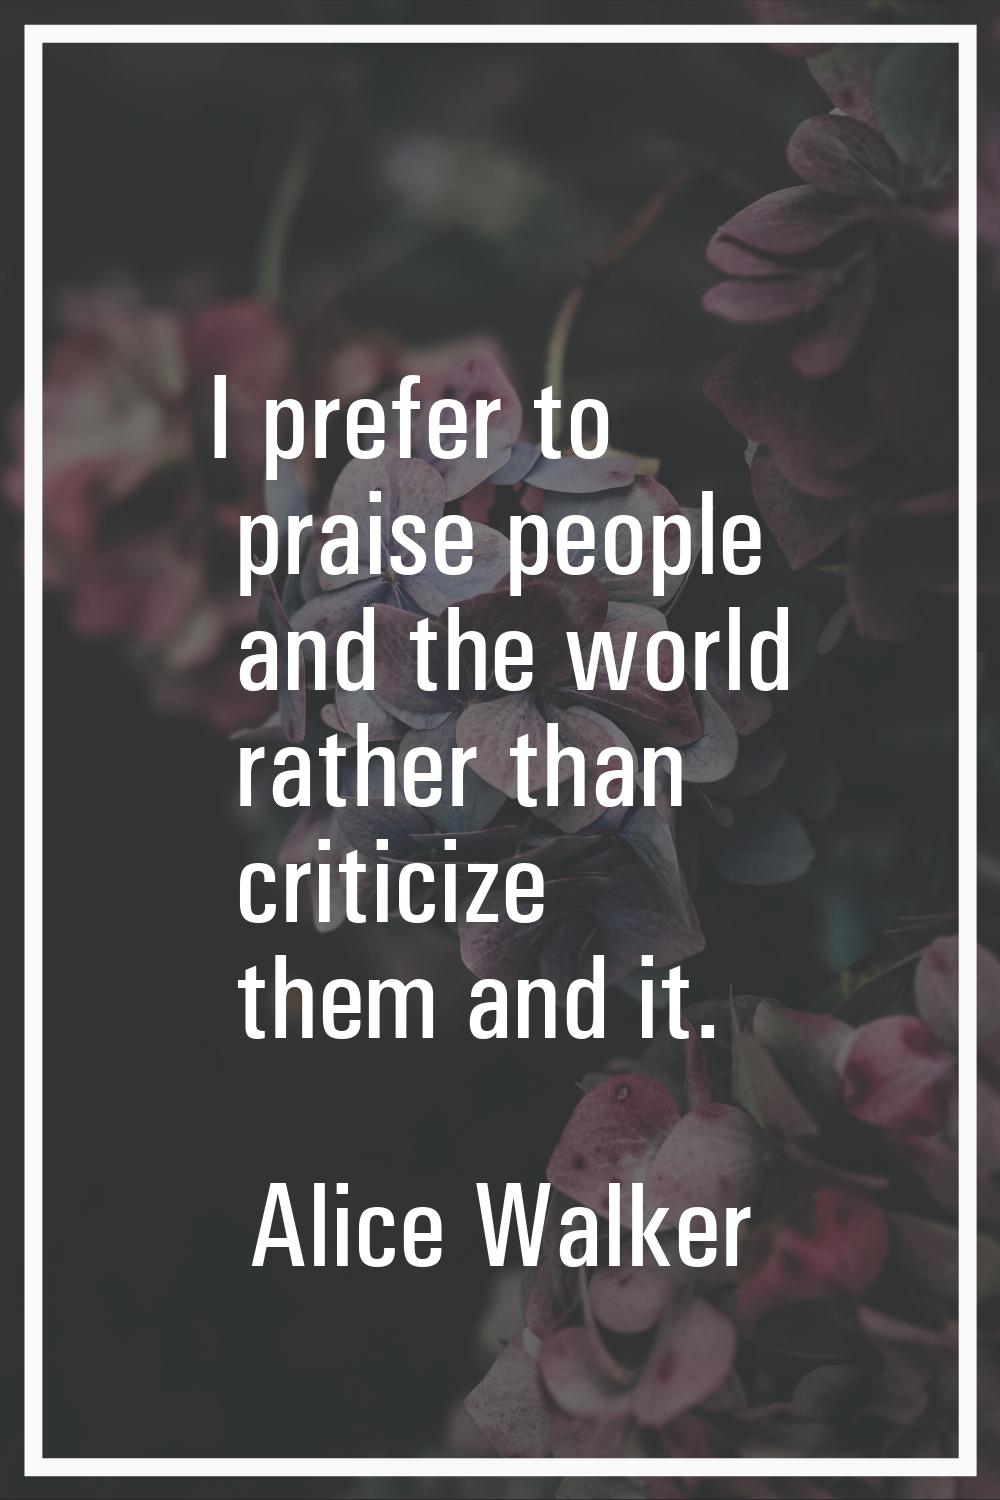 I prefer to praise people and the world rather than criticize them and it.